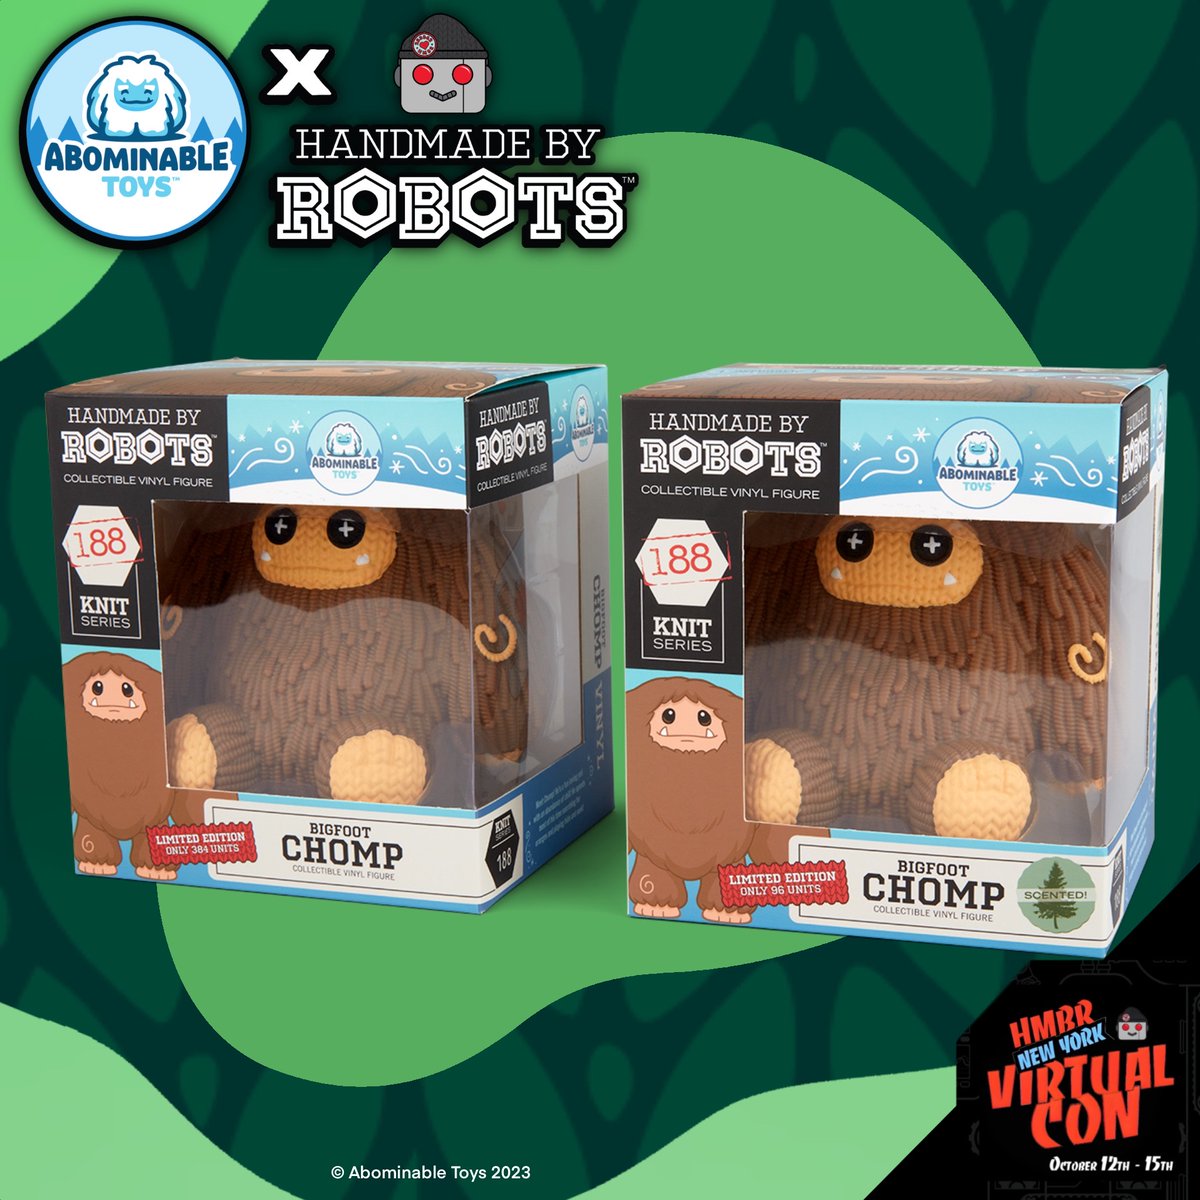 Chomp and Bigfoot Chomp HMBR figures are available now on HMBR.fans!

Bigfoot Chomp is a limited edition figure with a chance of pine scented chase! 🌲

Bigfoot Chomp
LE: 480 
Price: $19.95

#HandmadebyRobots #AbominableToys #HMBR #Chomp #KnitSeries